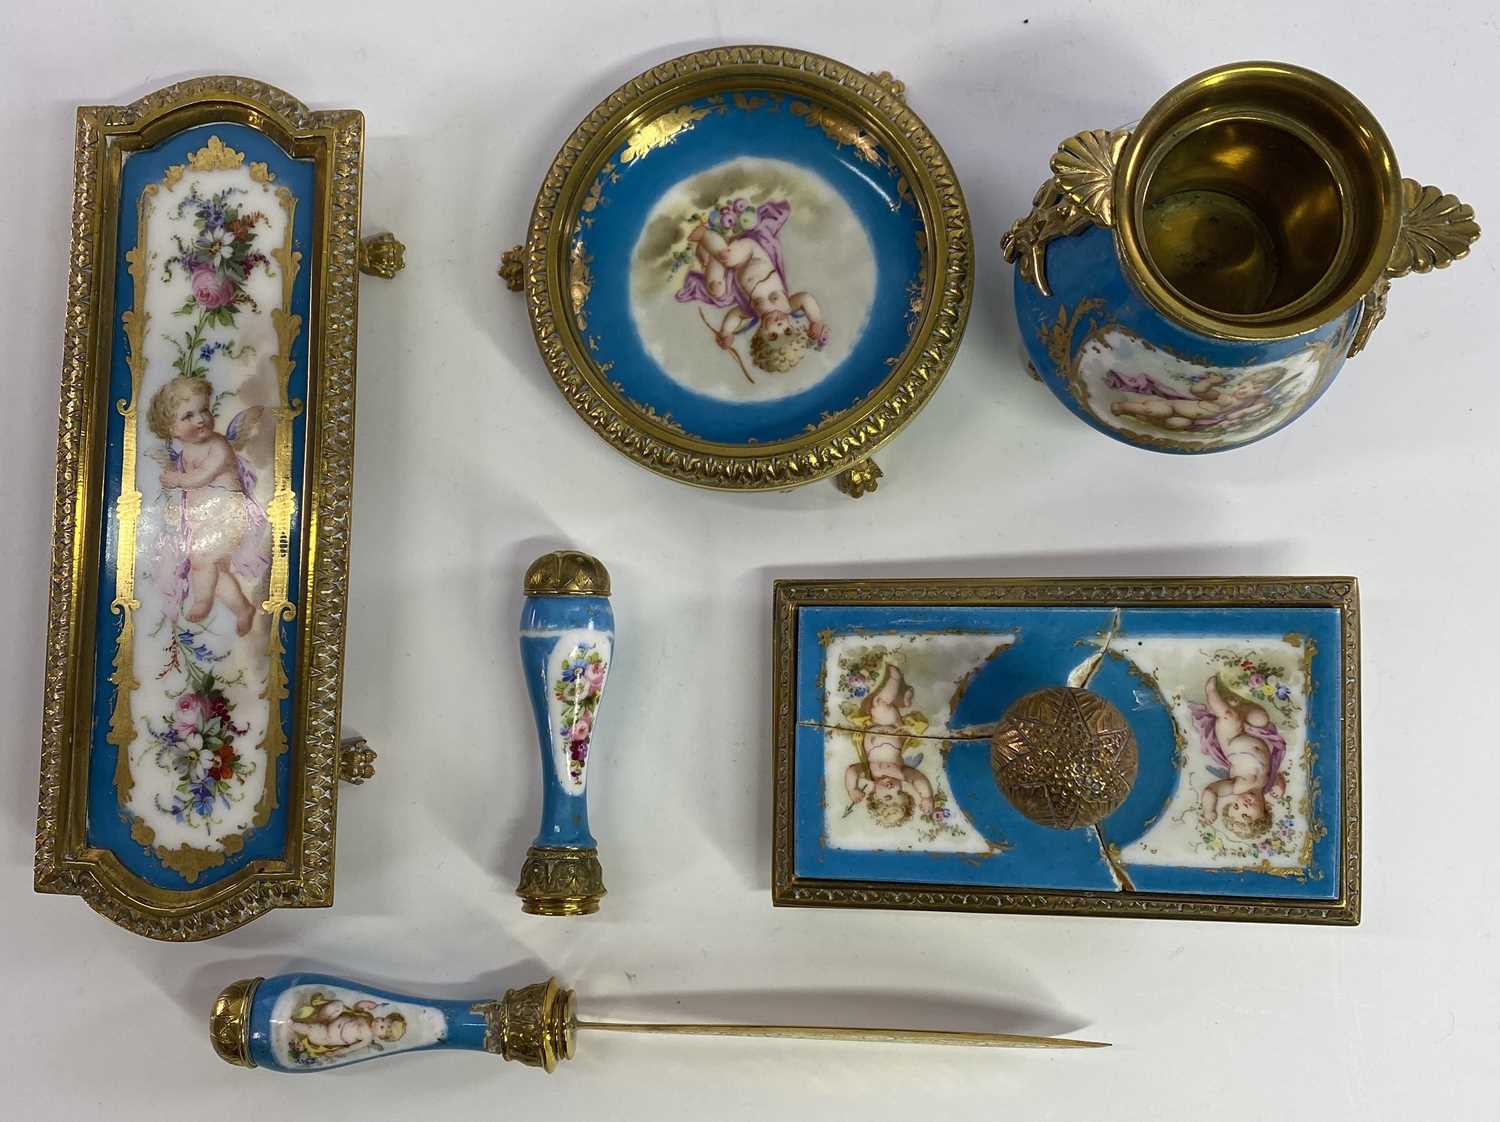 GILT ORMOLU MOUNTED FRENCH PORCELAIN DESK SET - 6 items, the porcelain all decorated with floral and - Image 2 of 2